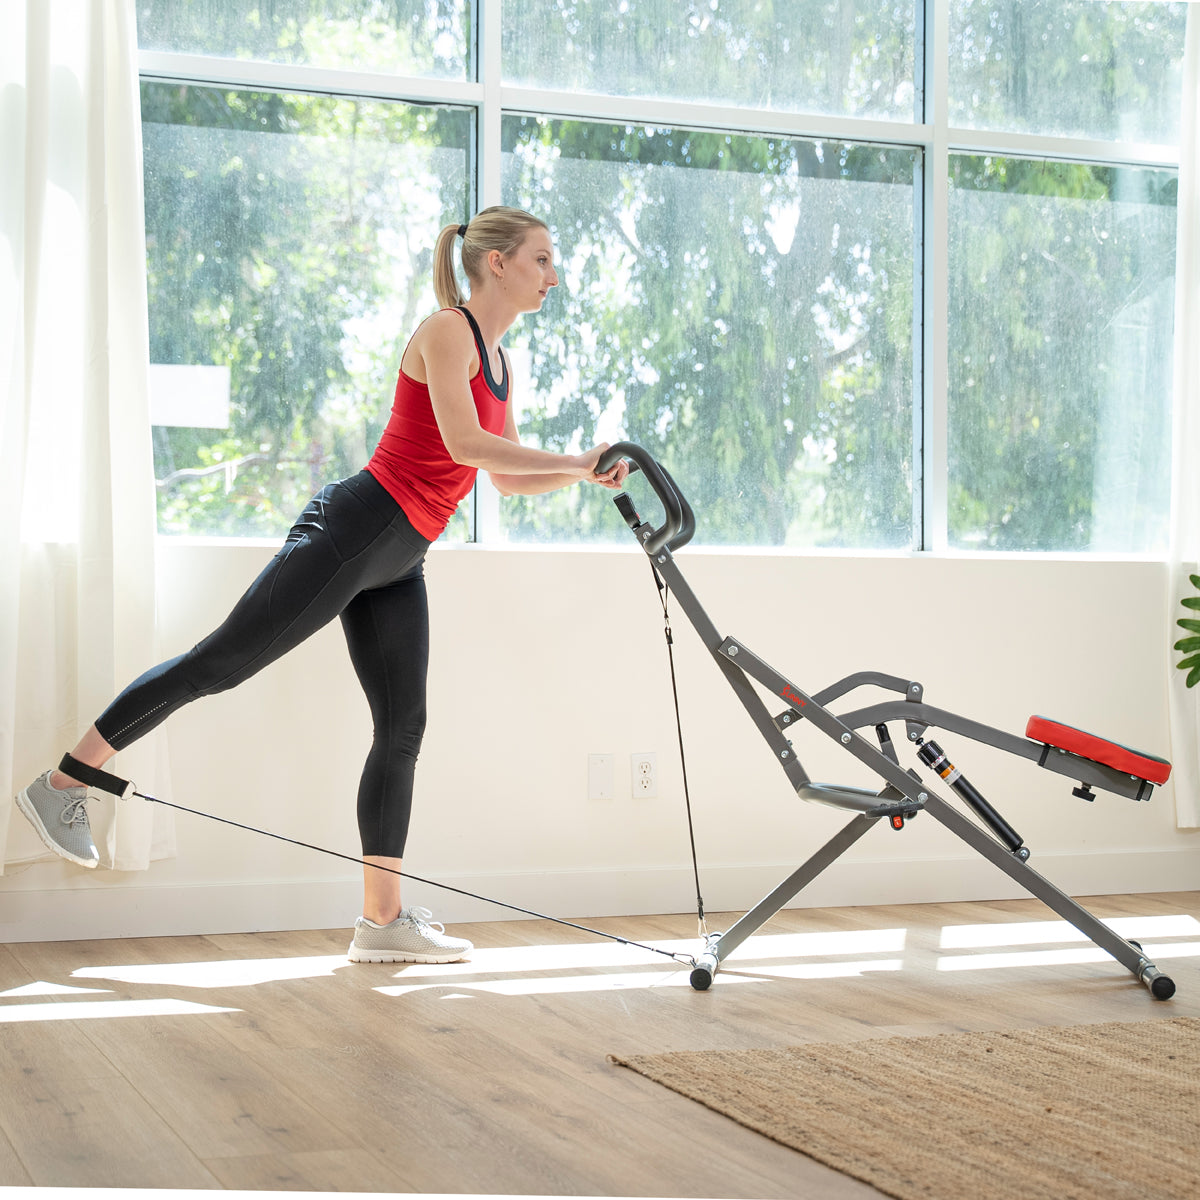  Sunny Health & Fitness Smart Upright Row-N-Ride™ Exerciser,  Squat Assist Trainer for Glutes Workout with Adjustable Resistance, Easy  Setup & Foldable, Glute & Leg Exercise Machine- NO. 077SMART : Sports